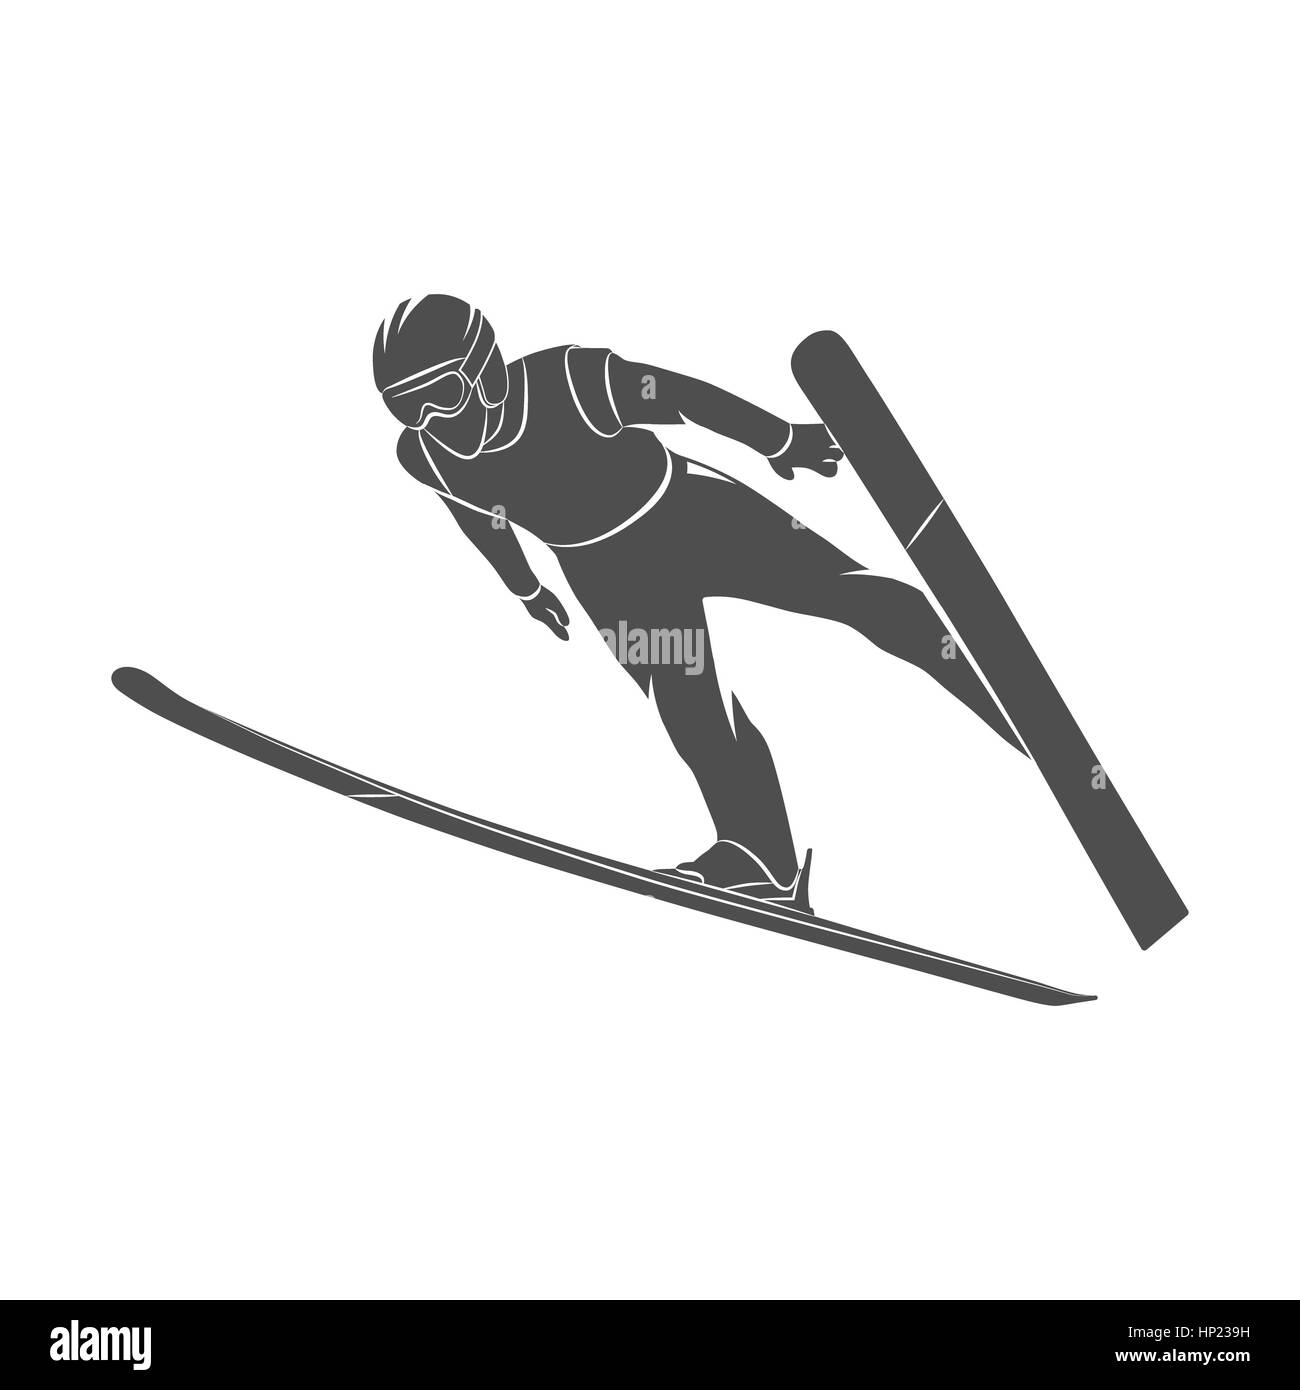 Silhouette jumping skier on a white background. Photo illustration. Stock Photo